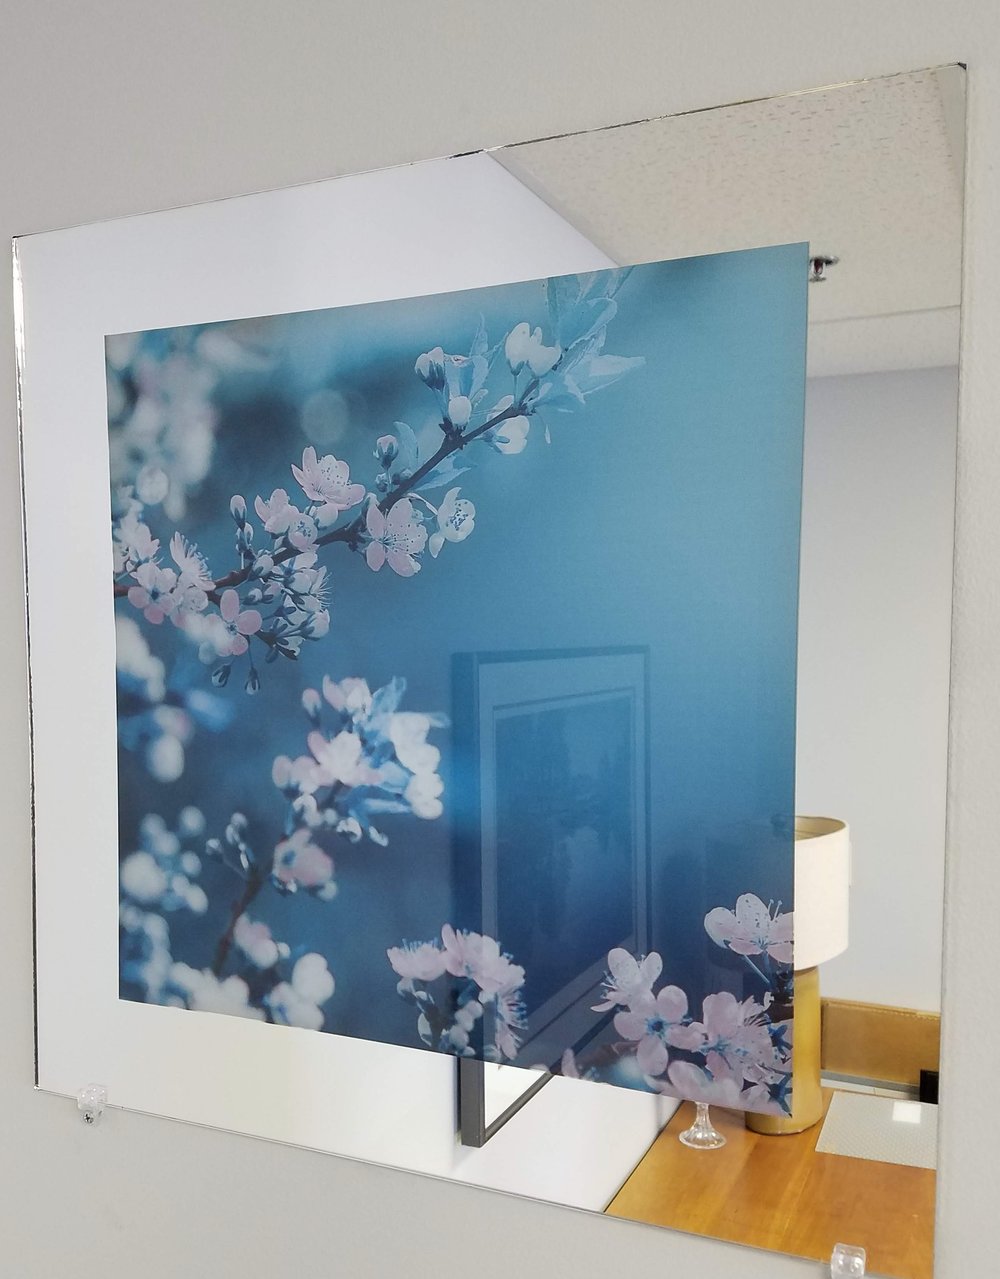 Digital Printing — D & W Incorporated Mirror, Fabricated mirror glass